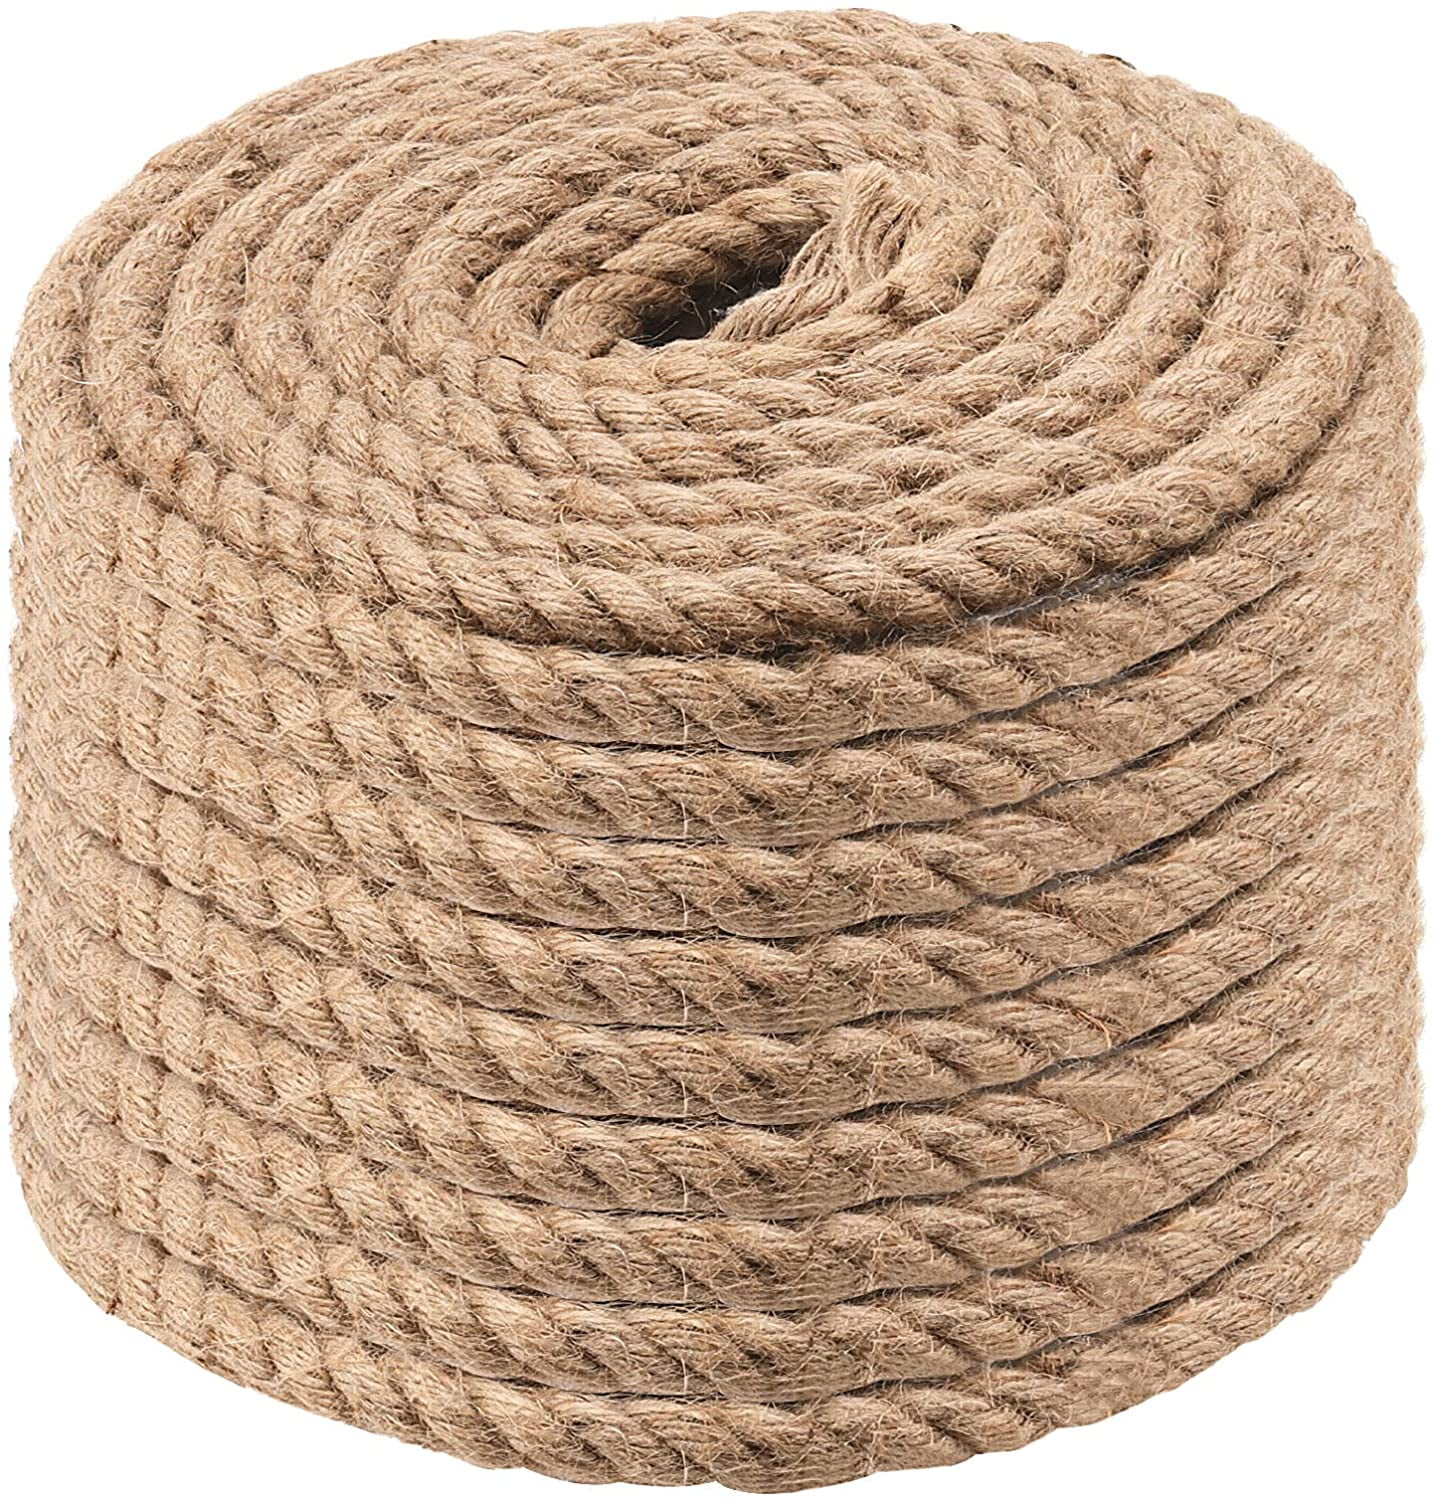 Rophomor 1000FT Jute Twine Rope 3mm 6ply Natural Thick Garden Twine String  Heavy Duty for Gardening Bundling Crafts Arts Gift Brown Jute-03-1000